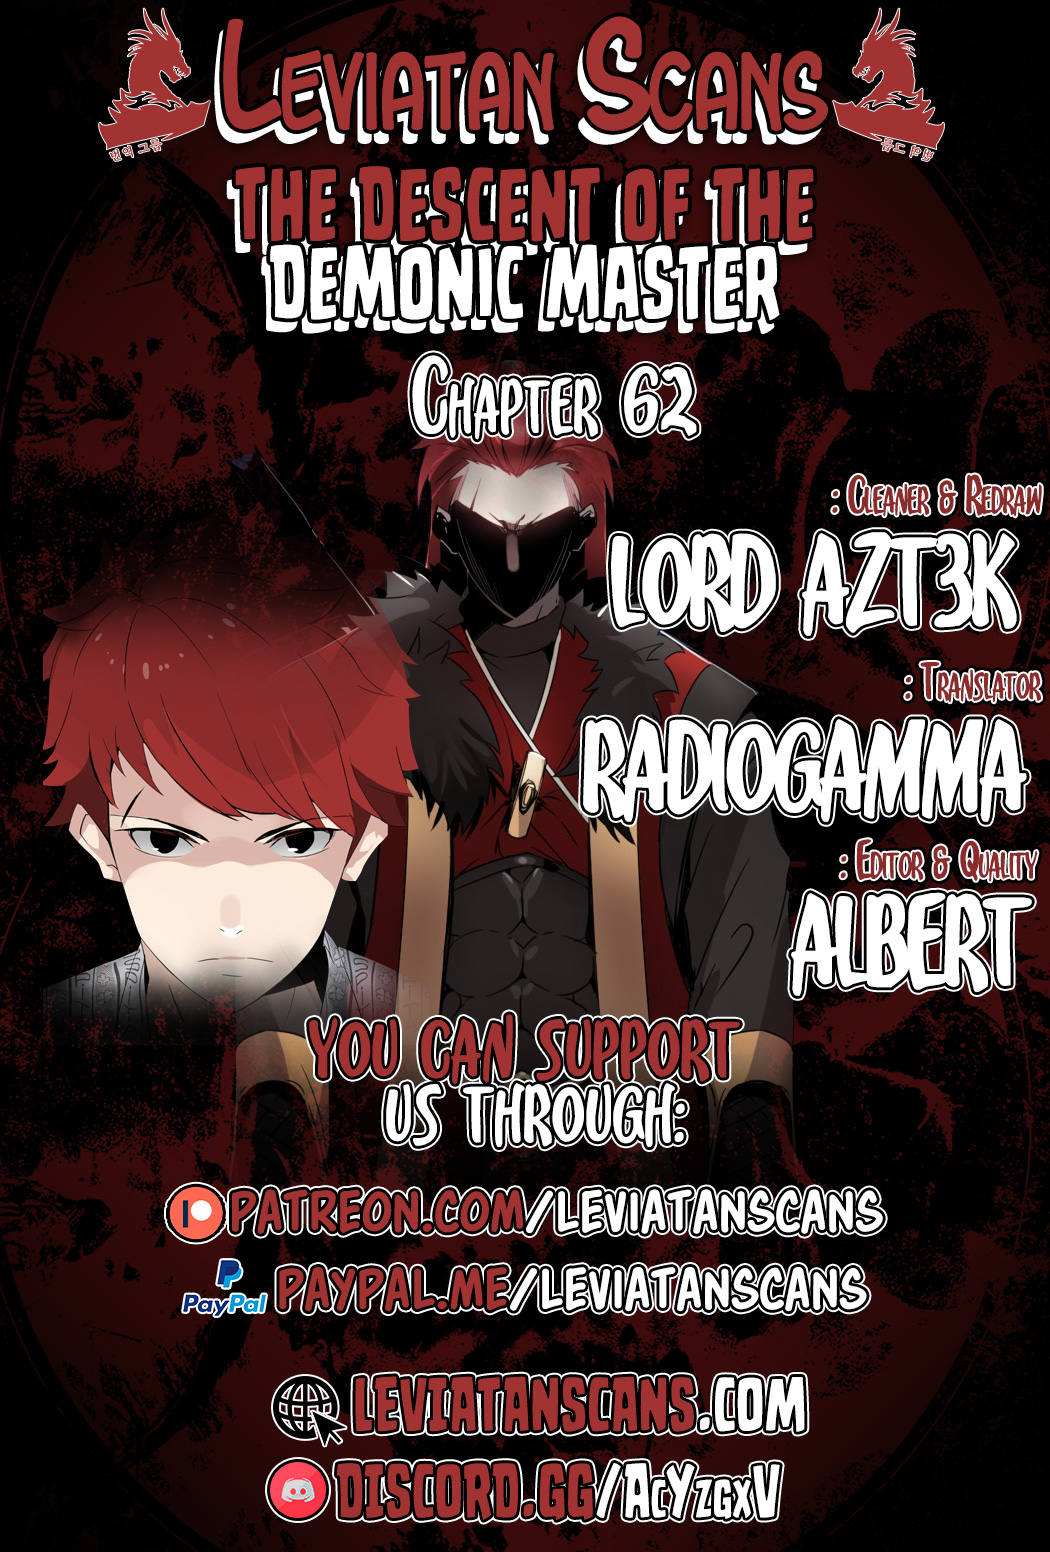 The Descent of the Demonic Master 62 (1)